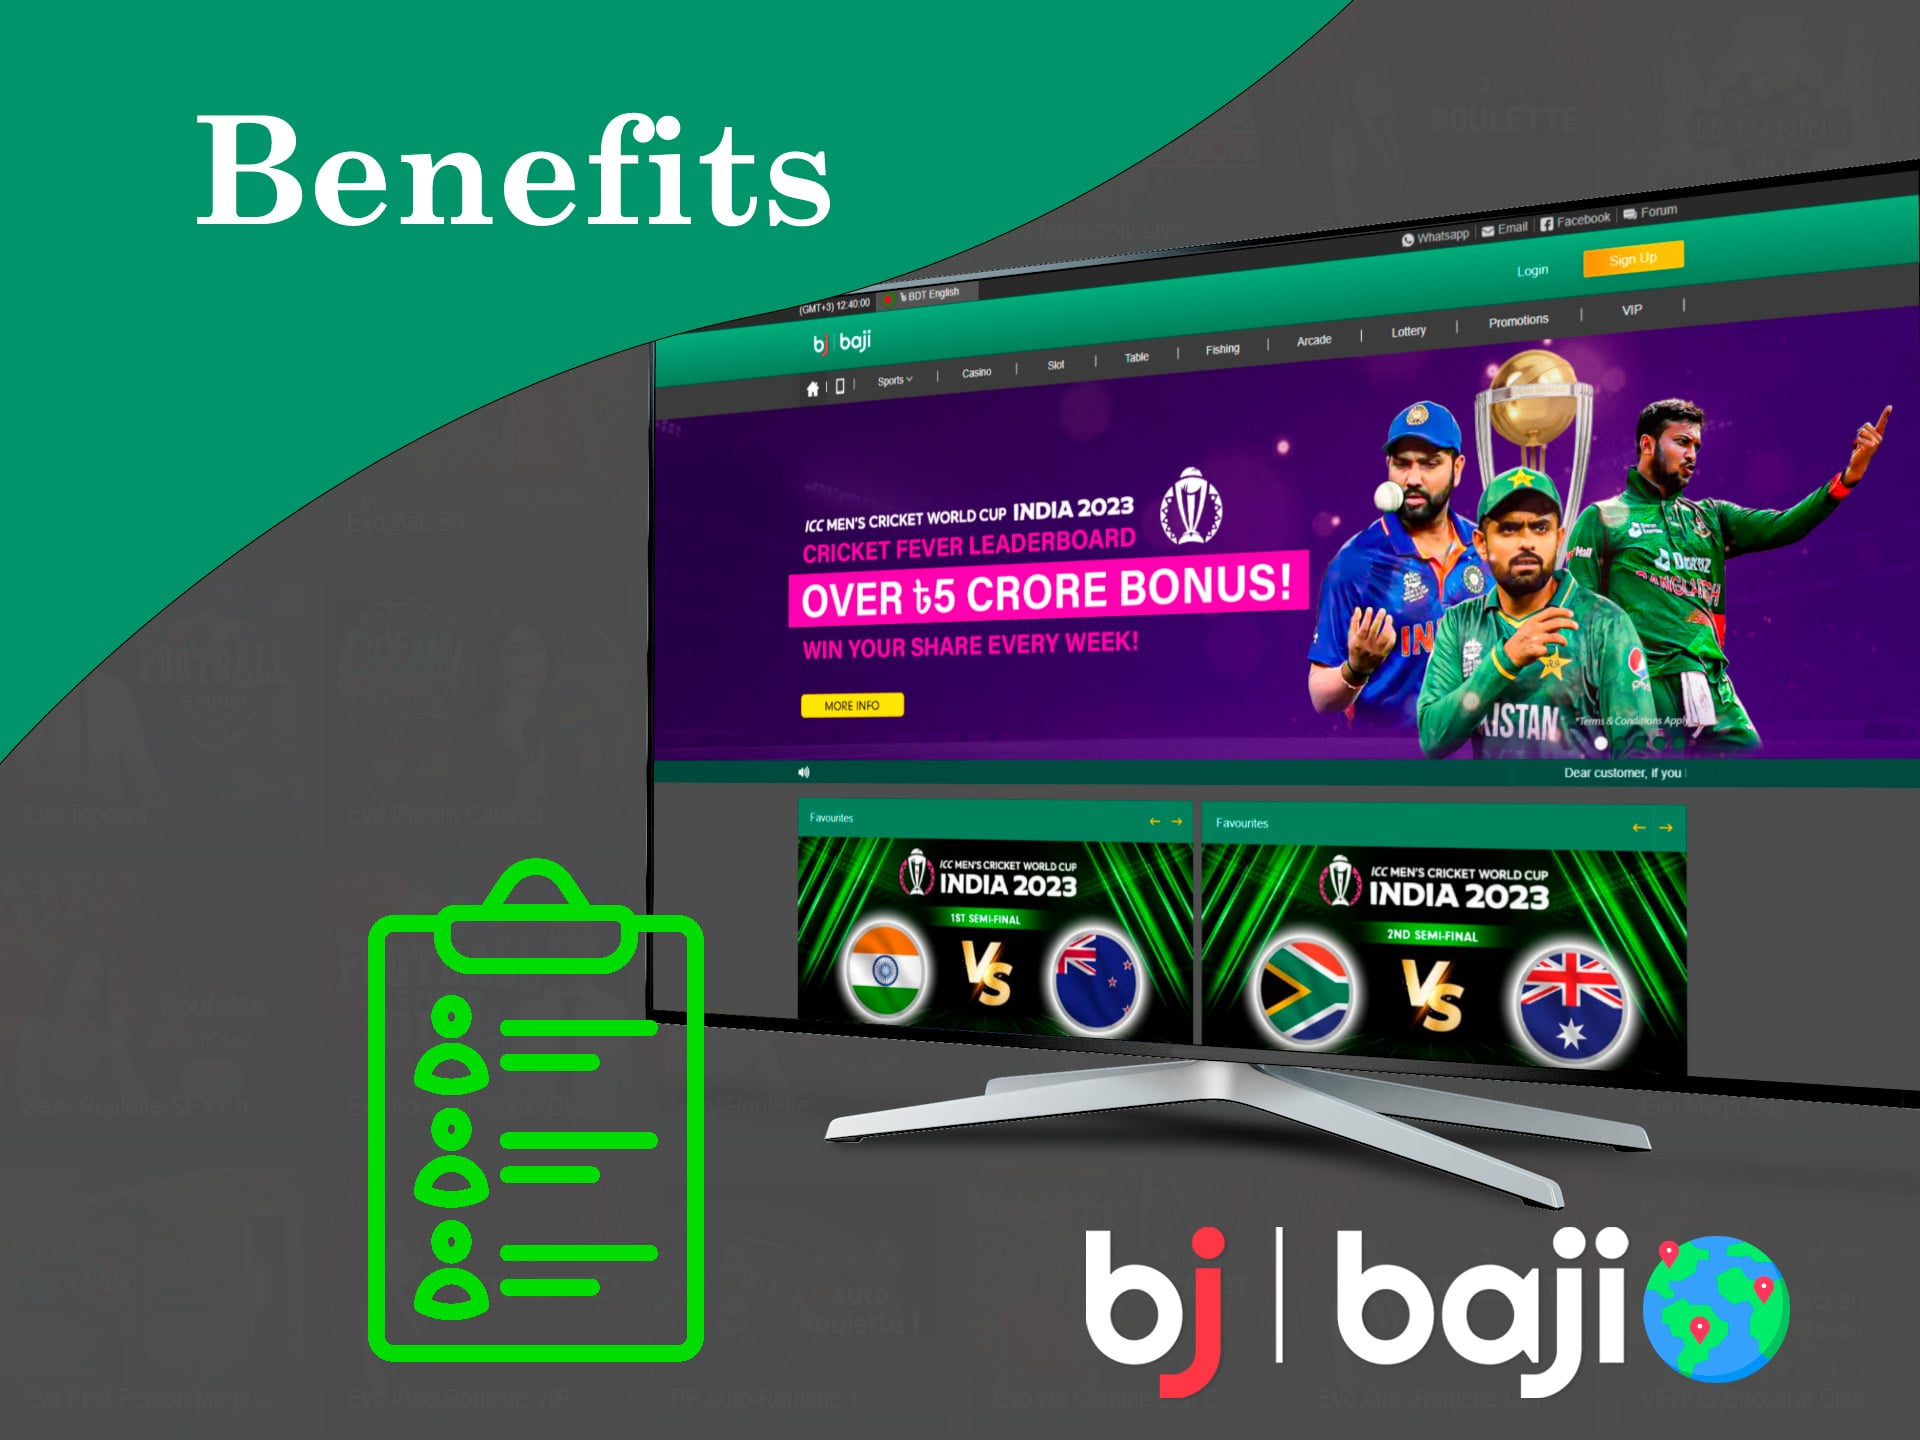 How To Become Better With https://baji-live-bd.com/ In 10 Minutes